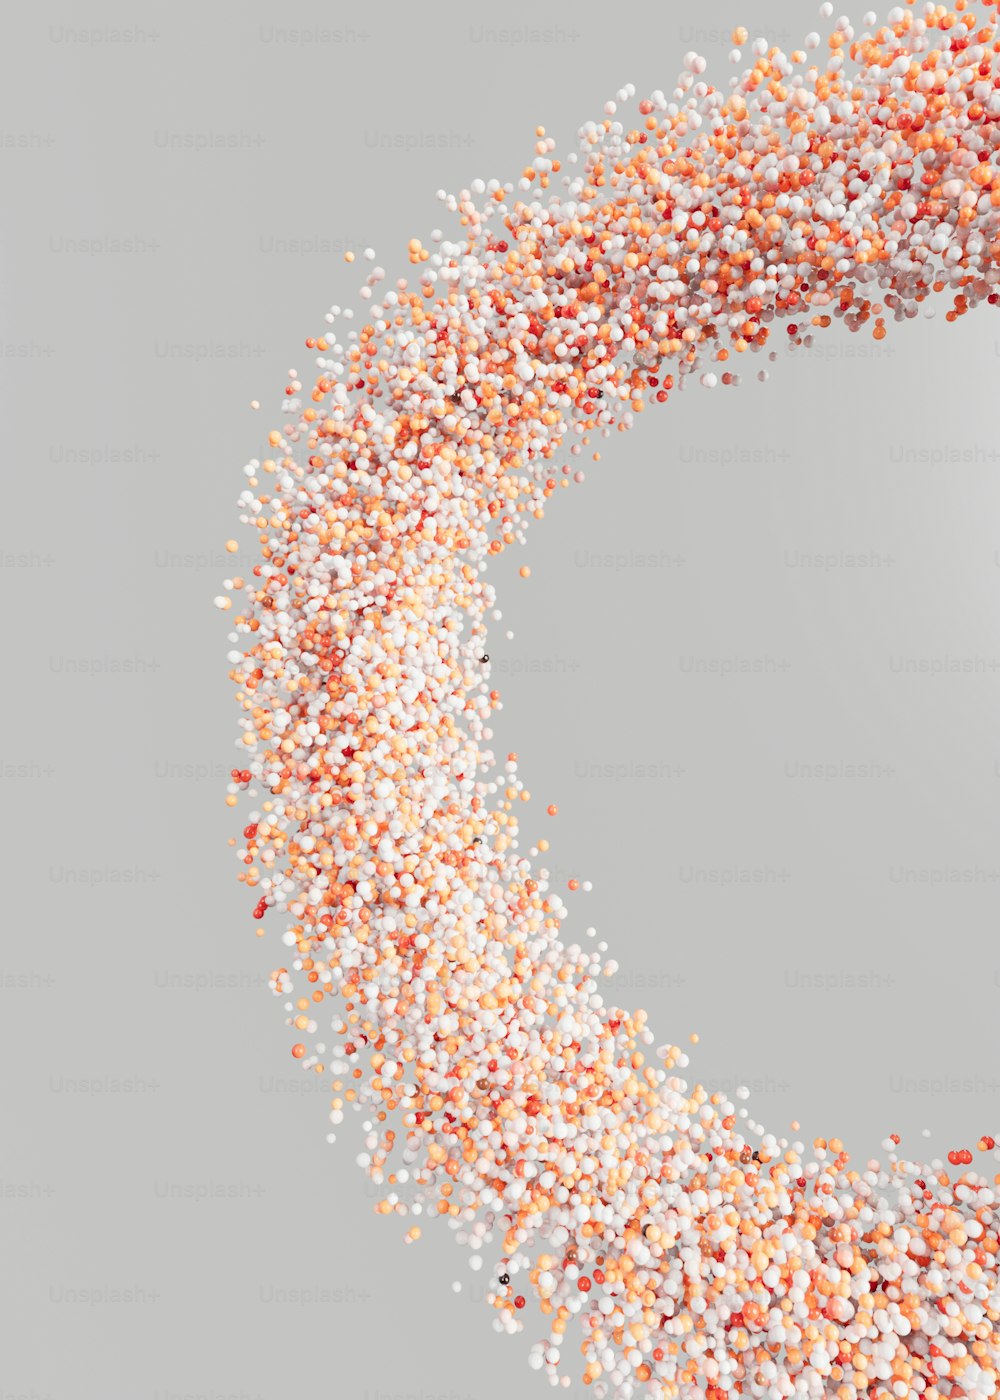 a circular frame made up of small white and orange sprinkles